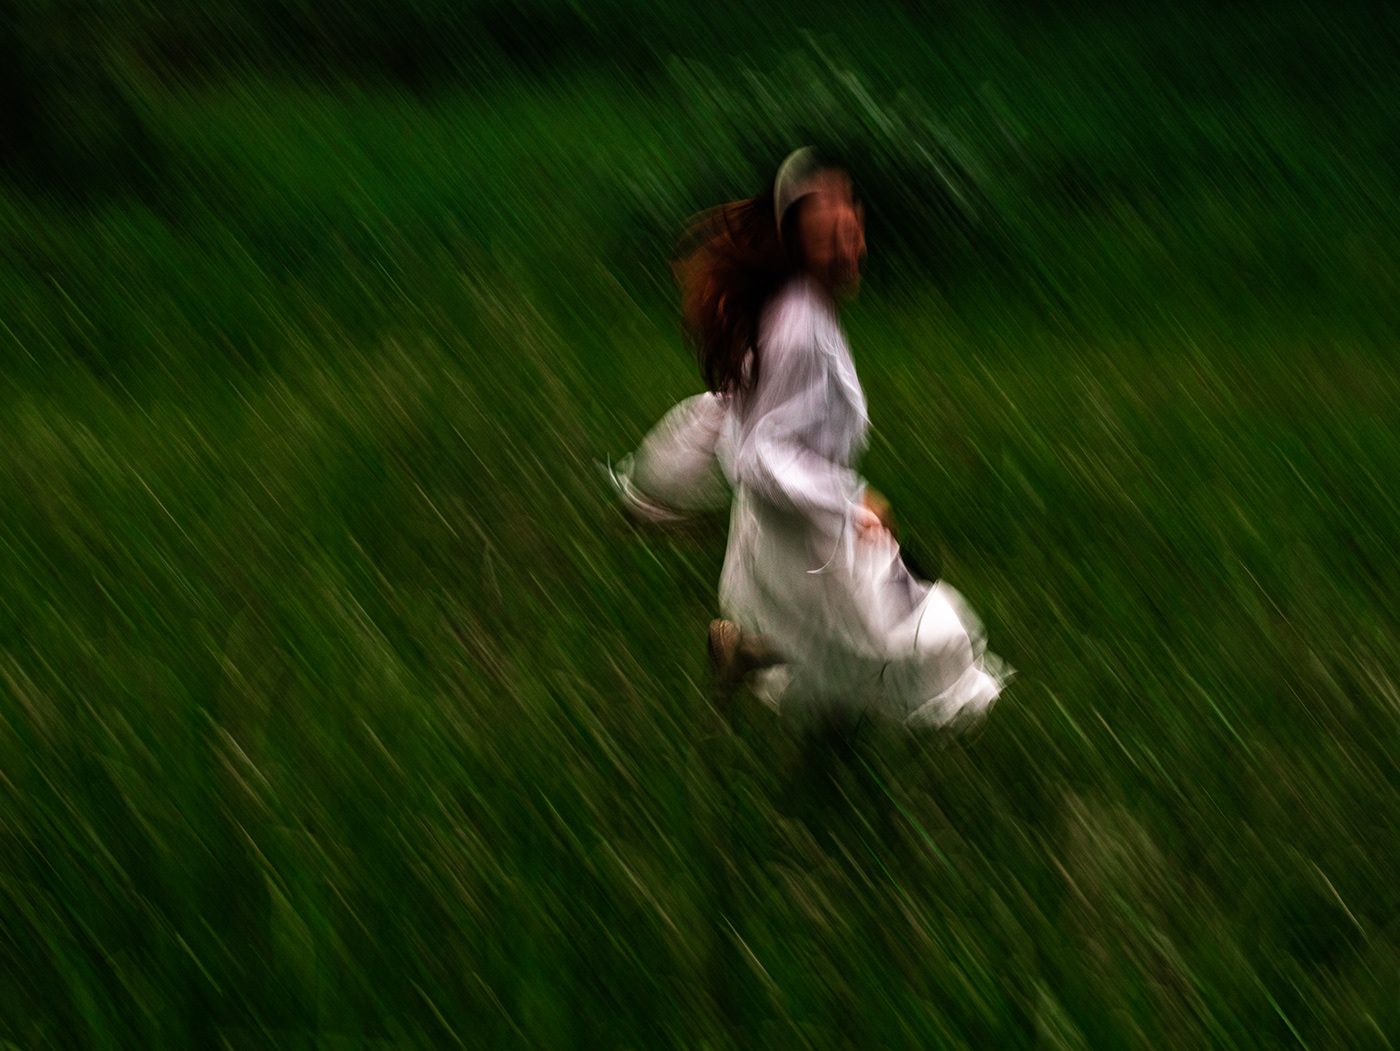 artistic Blurry editorial experimental field grass green Nature Passion Project photoshoot